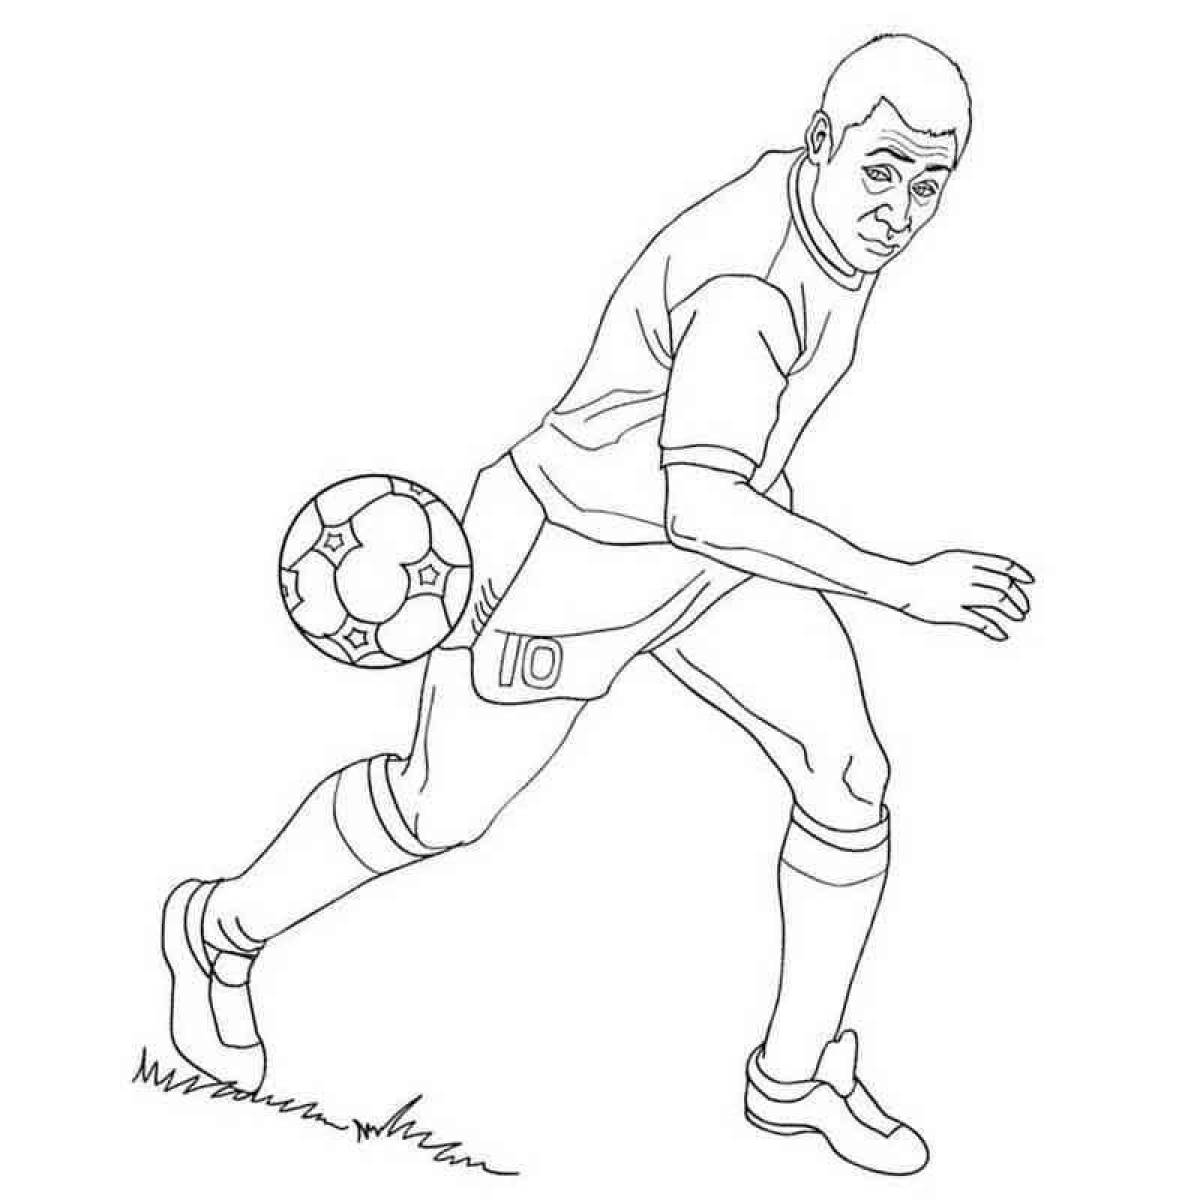 Coloring page dazzling footballer